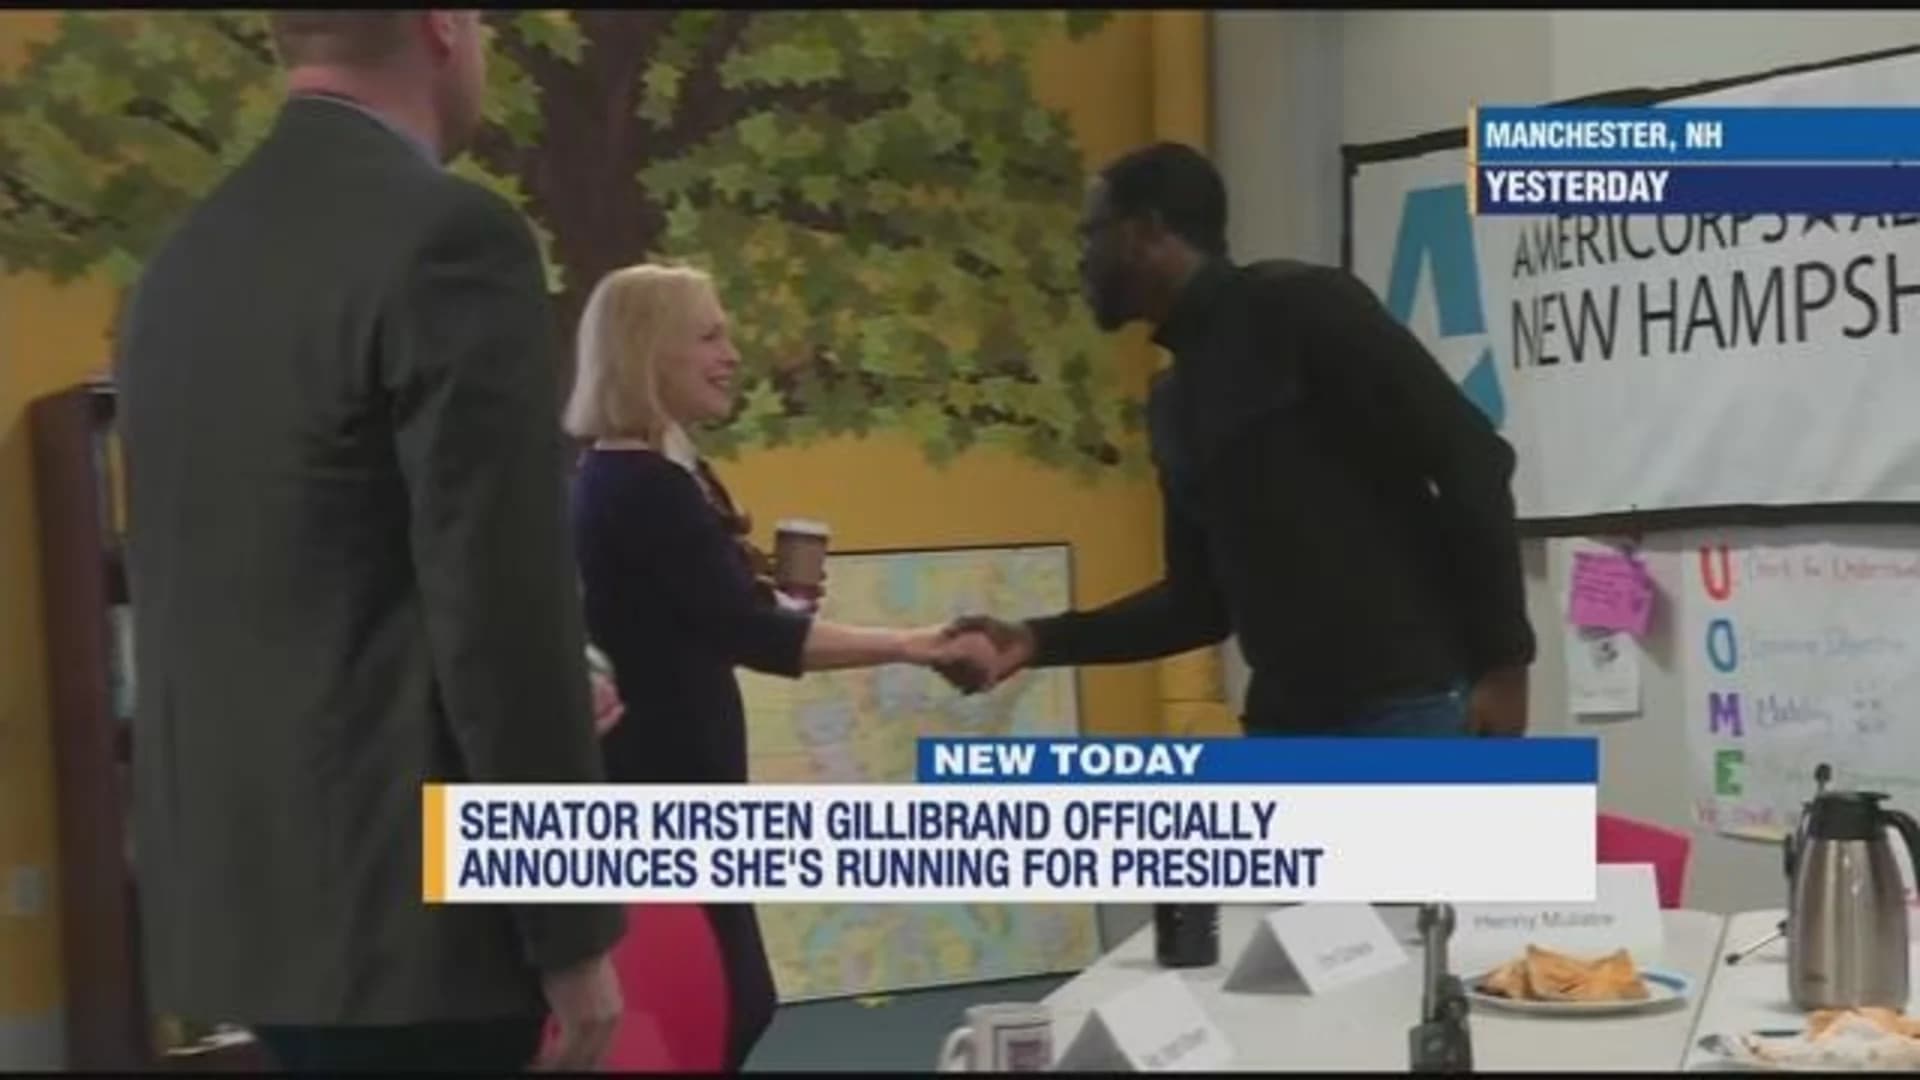 Gillibrand in 2020 Democratic race as full-fledged candidate